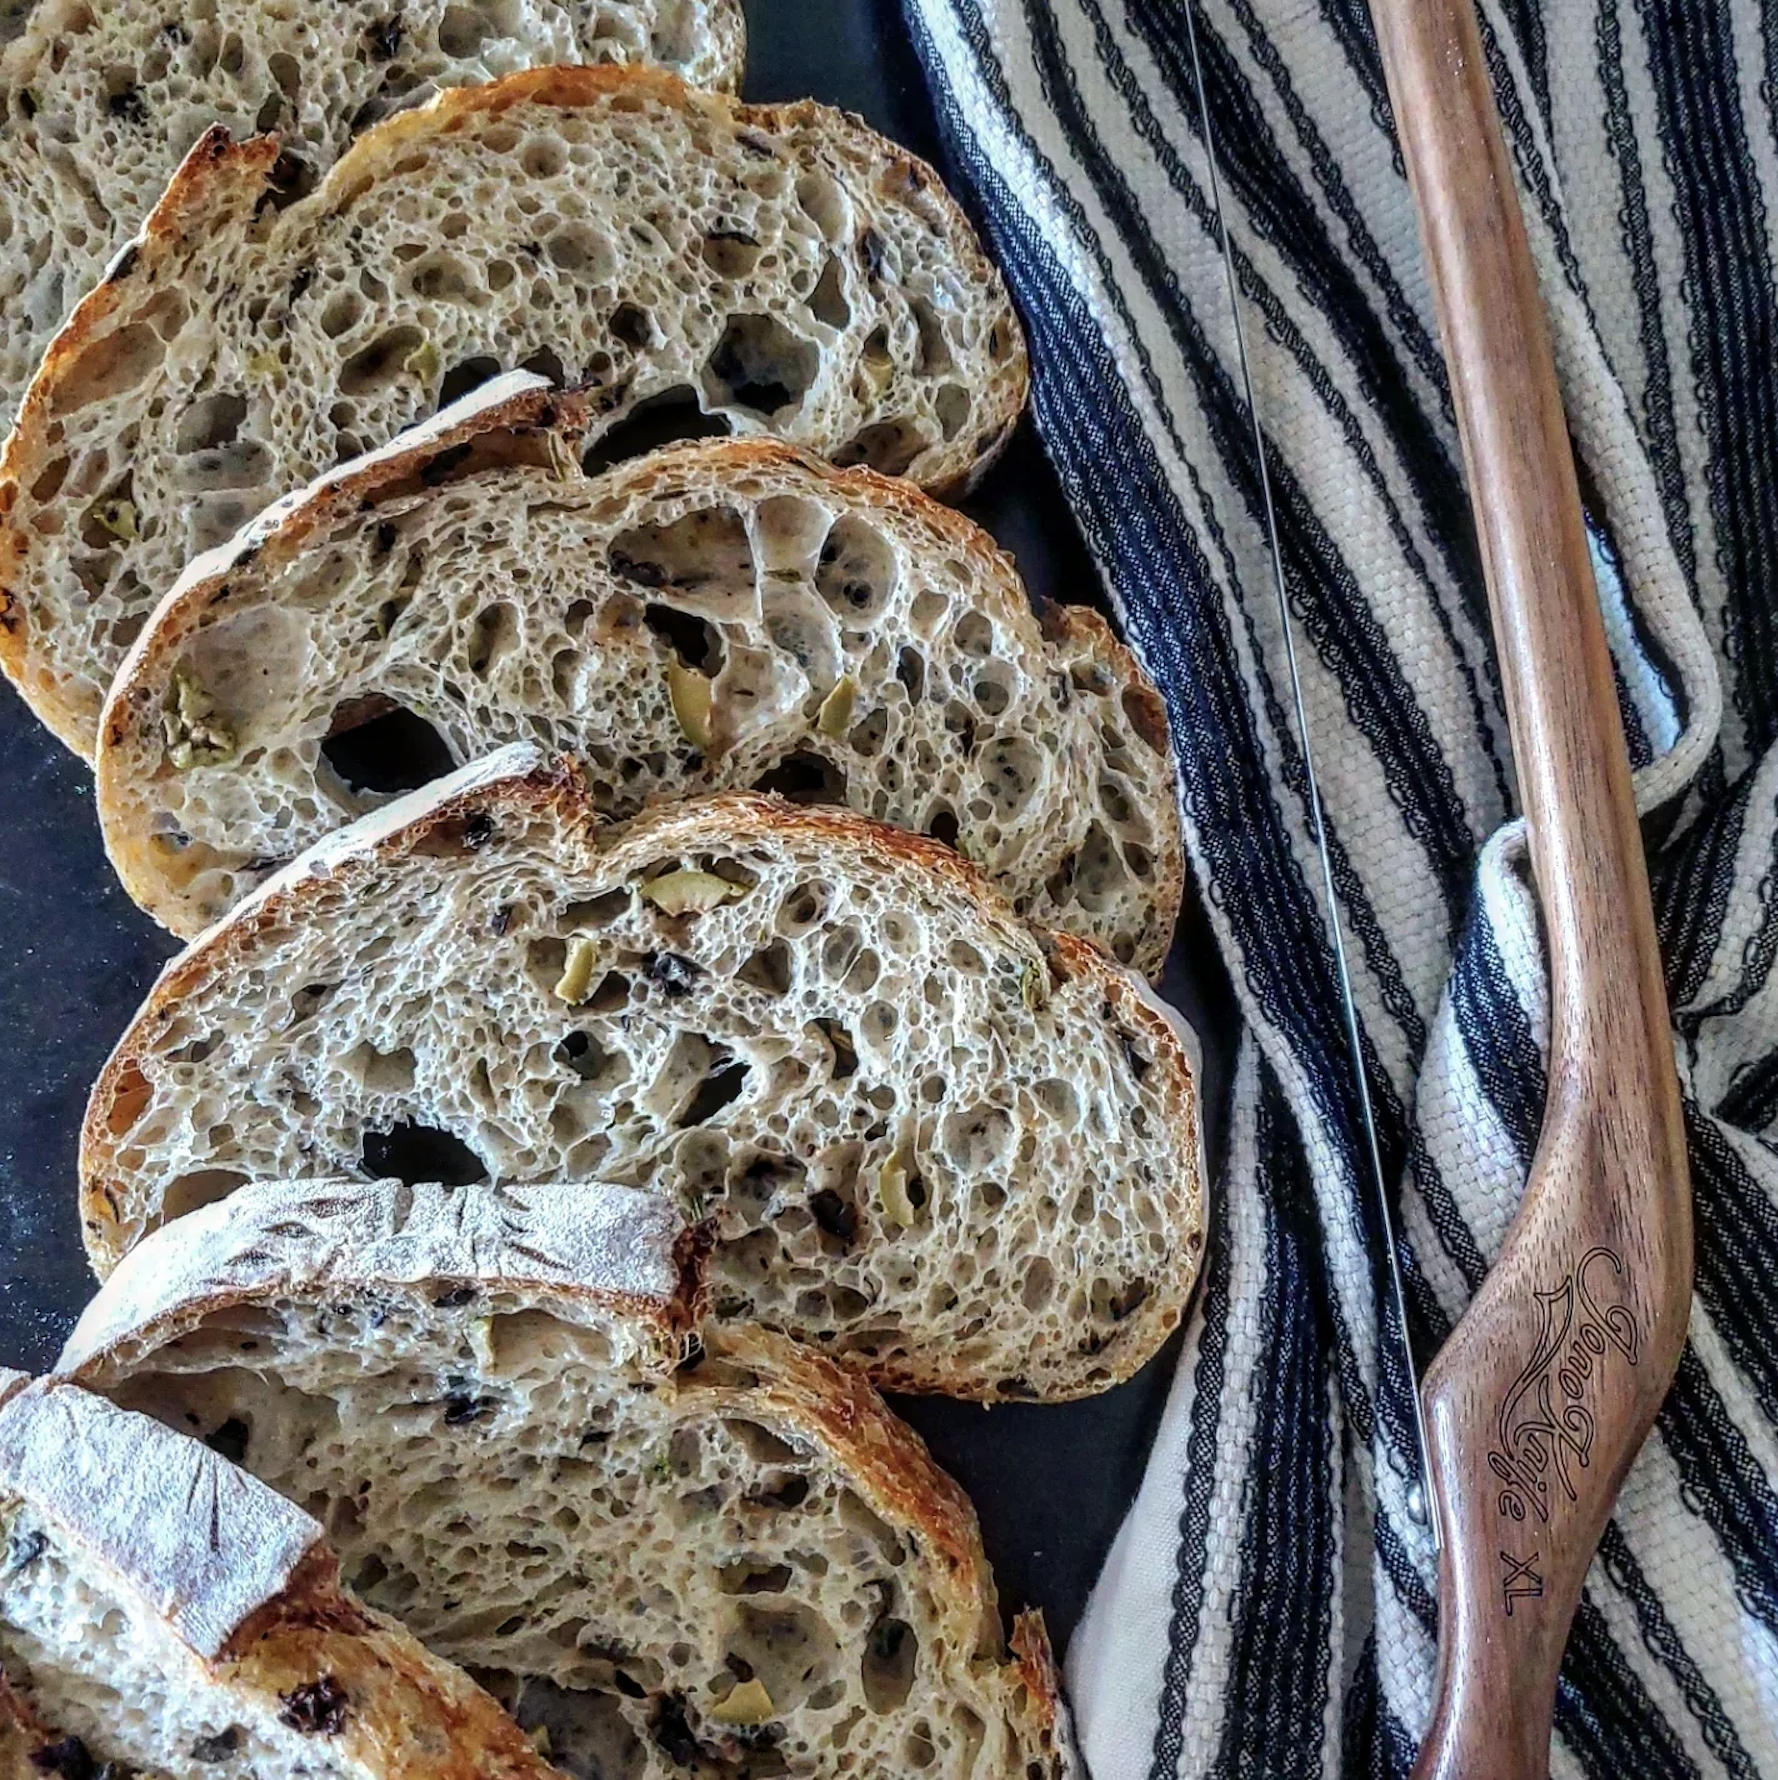 sourdough bread influencer at home baker social media instagram video content creator Judy from @OhForTheLoaf in San Francisco California United States 94328